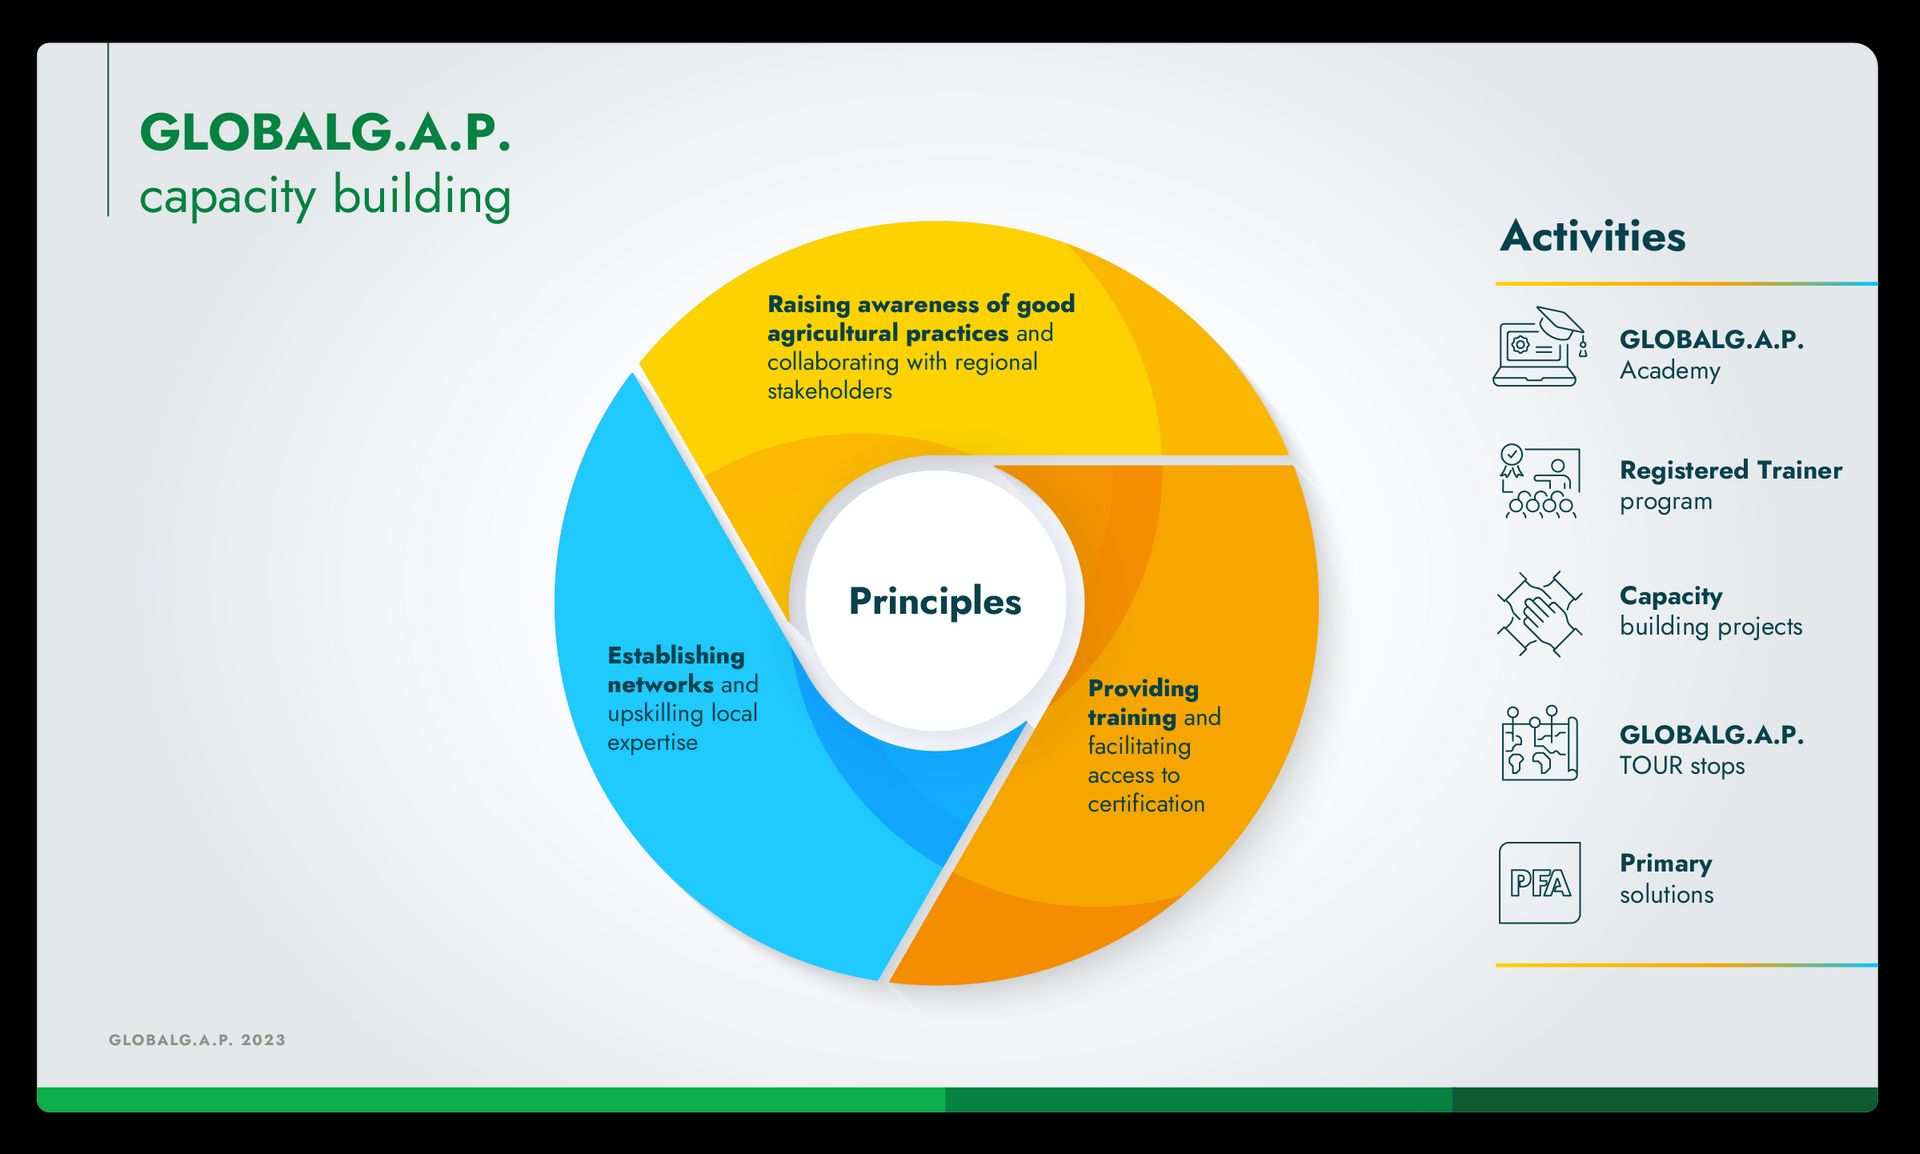 Infographic showing the principles and activities of GLOBALG.A.P. capacity building